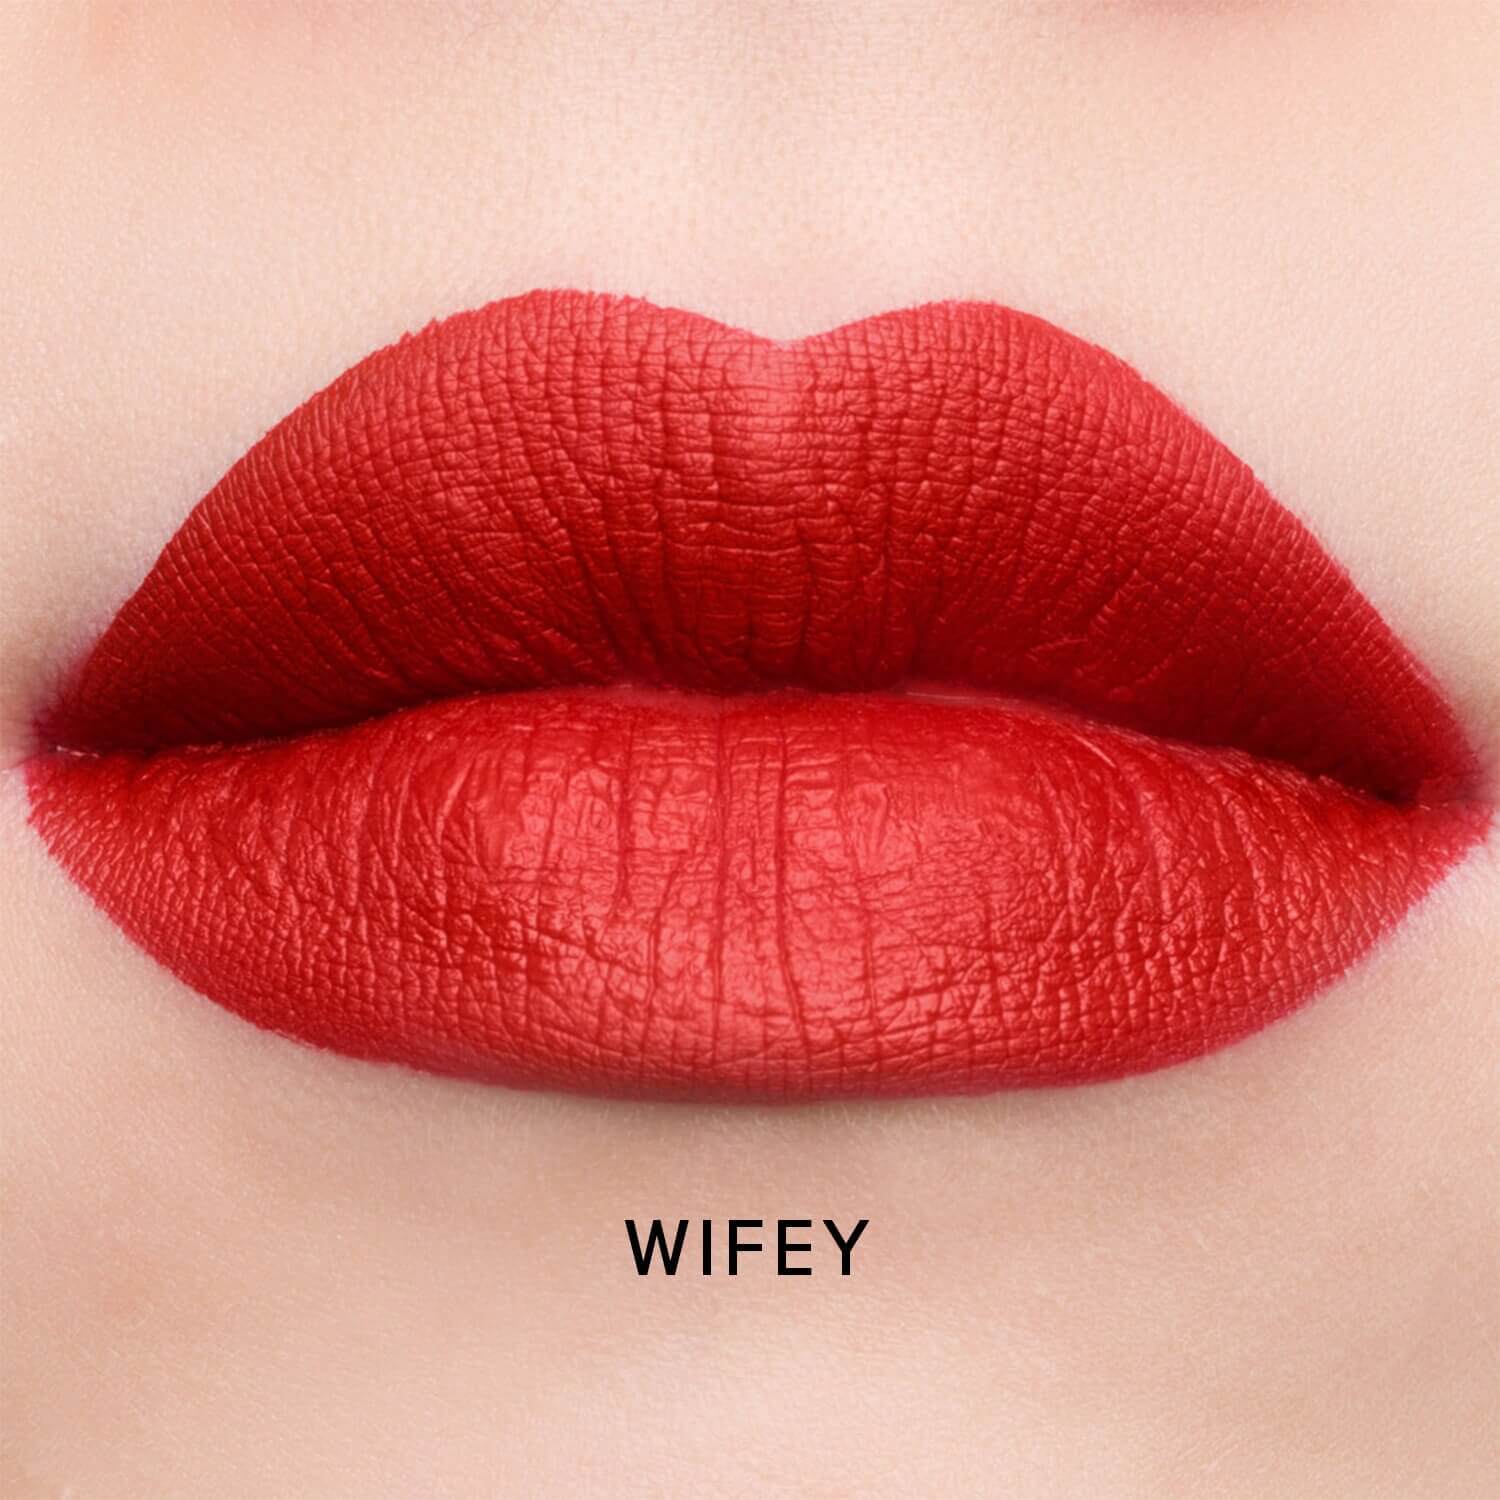 Jeffree Velour Liquid Lipstick wifey shade available at Heygirl.pk for delivery in Karachi, Lahore, Islamabad across Pakistan. 